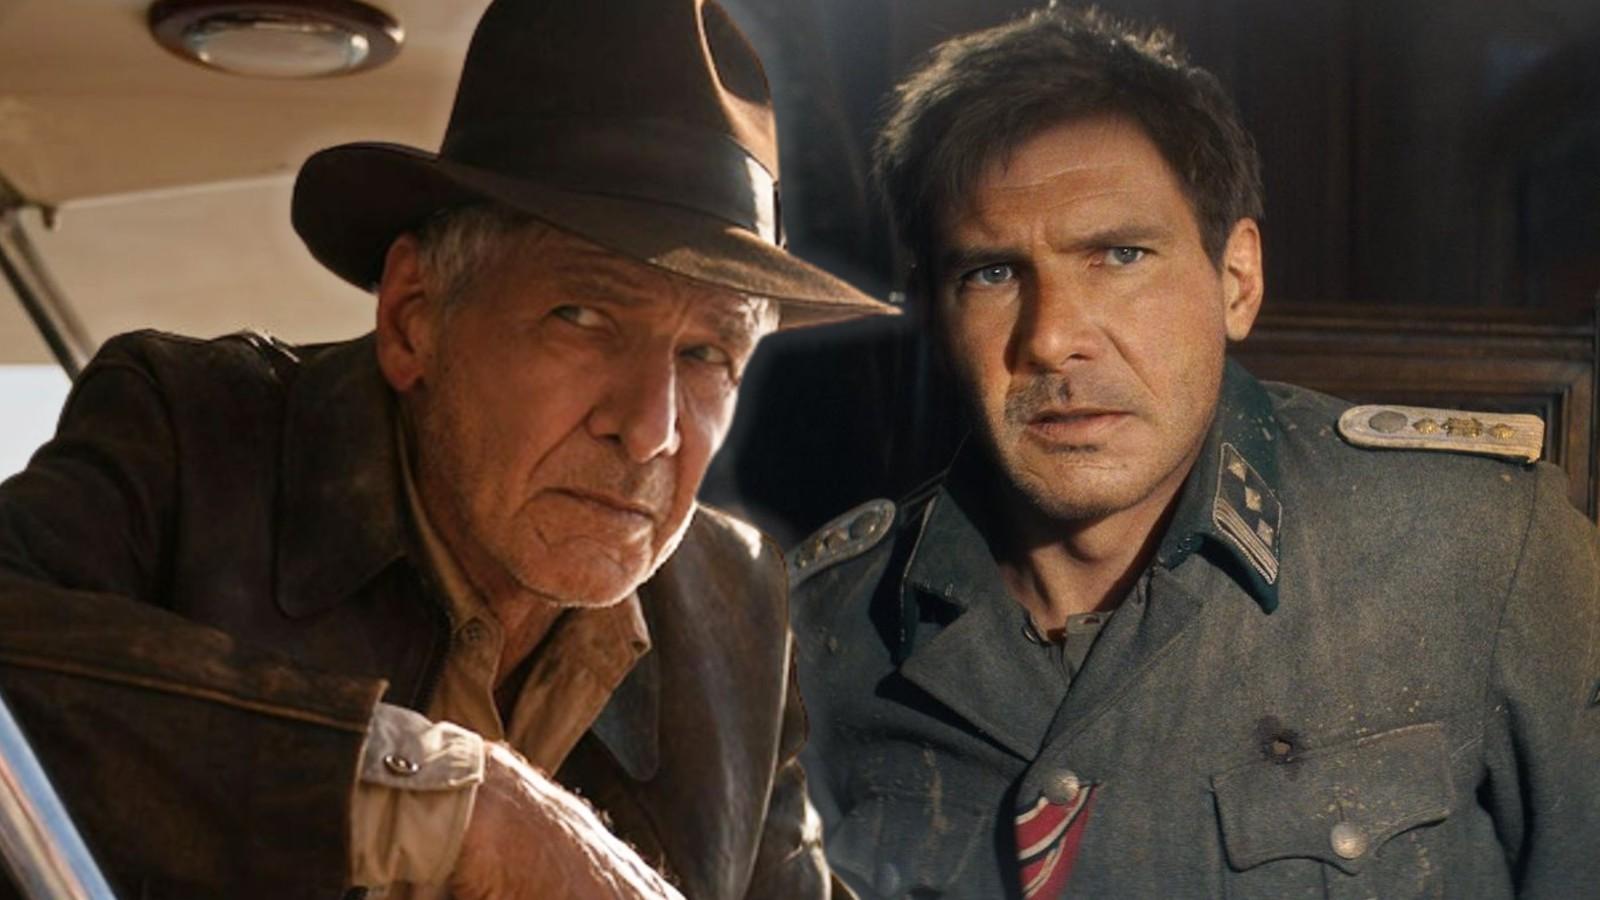 Harrison Ford in Indiana Jones 5, titled Indiana Jones and the Dial of Destiny